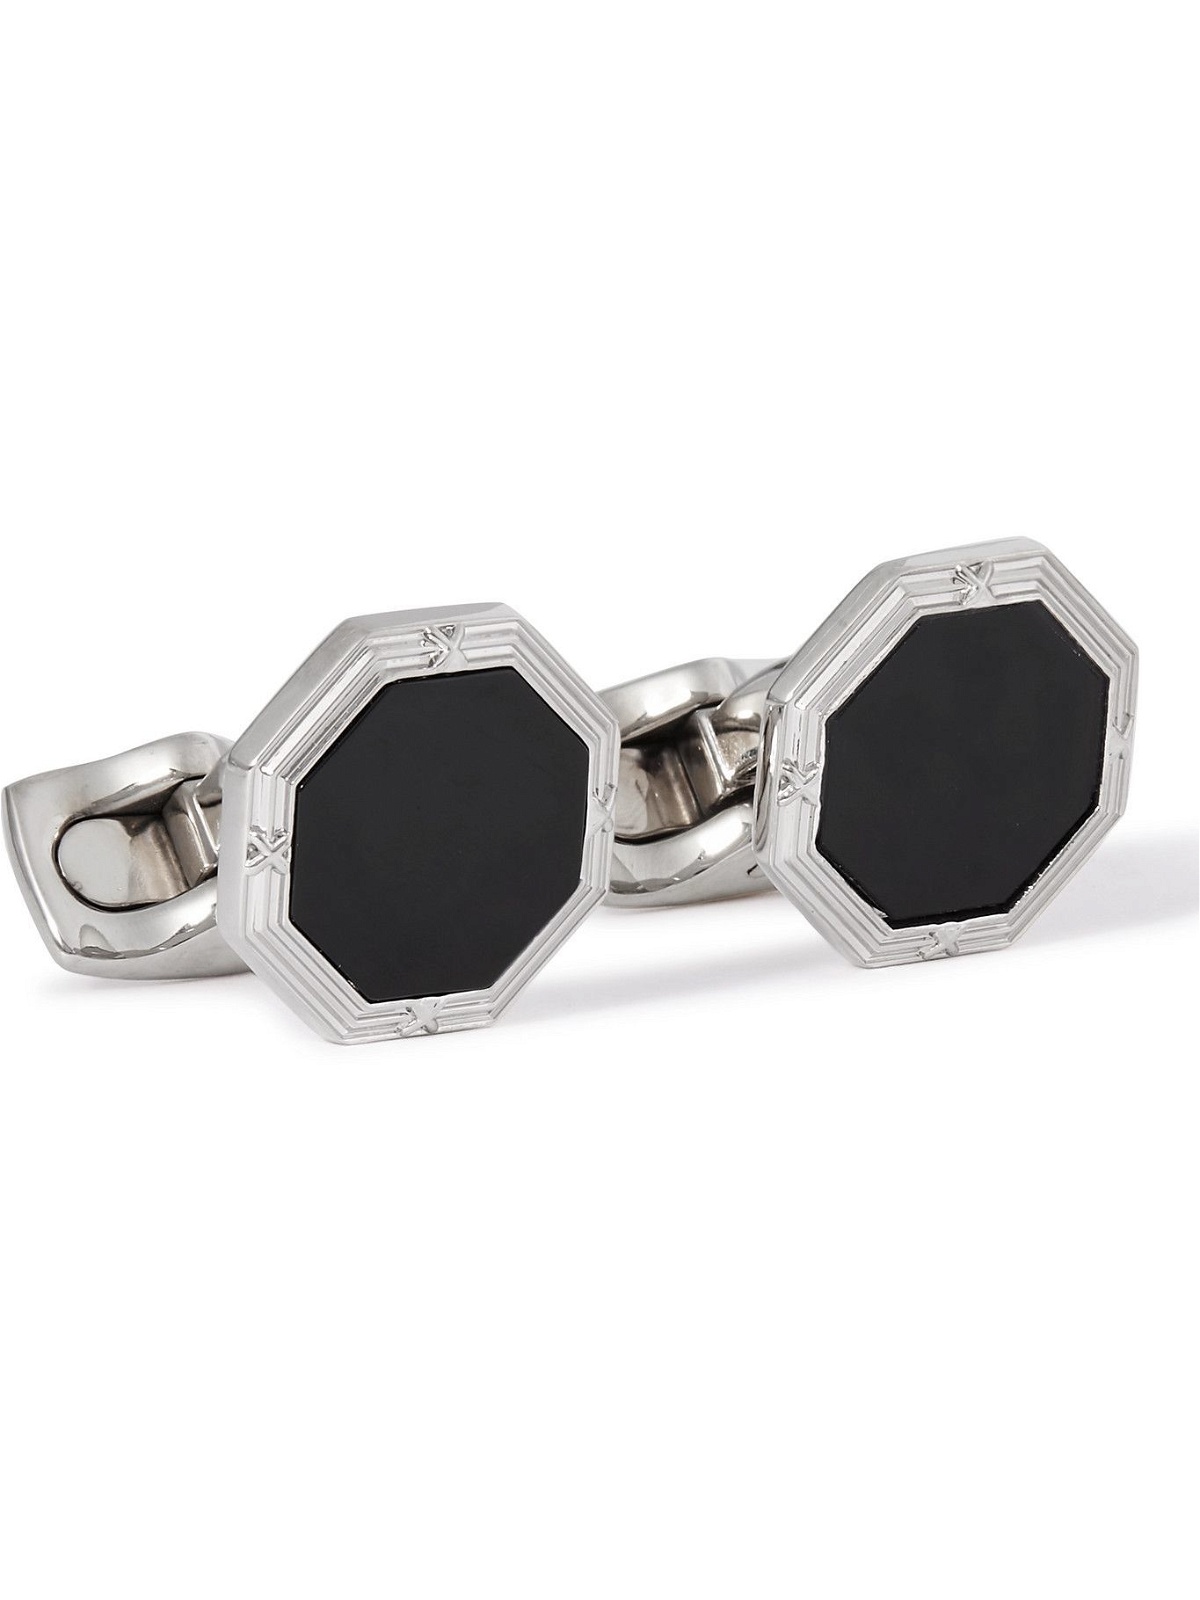 Photo: DEAKIN & FRANCIS - Sterling Silver and Onyx Cufflinks and Dress Studs Set